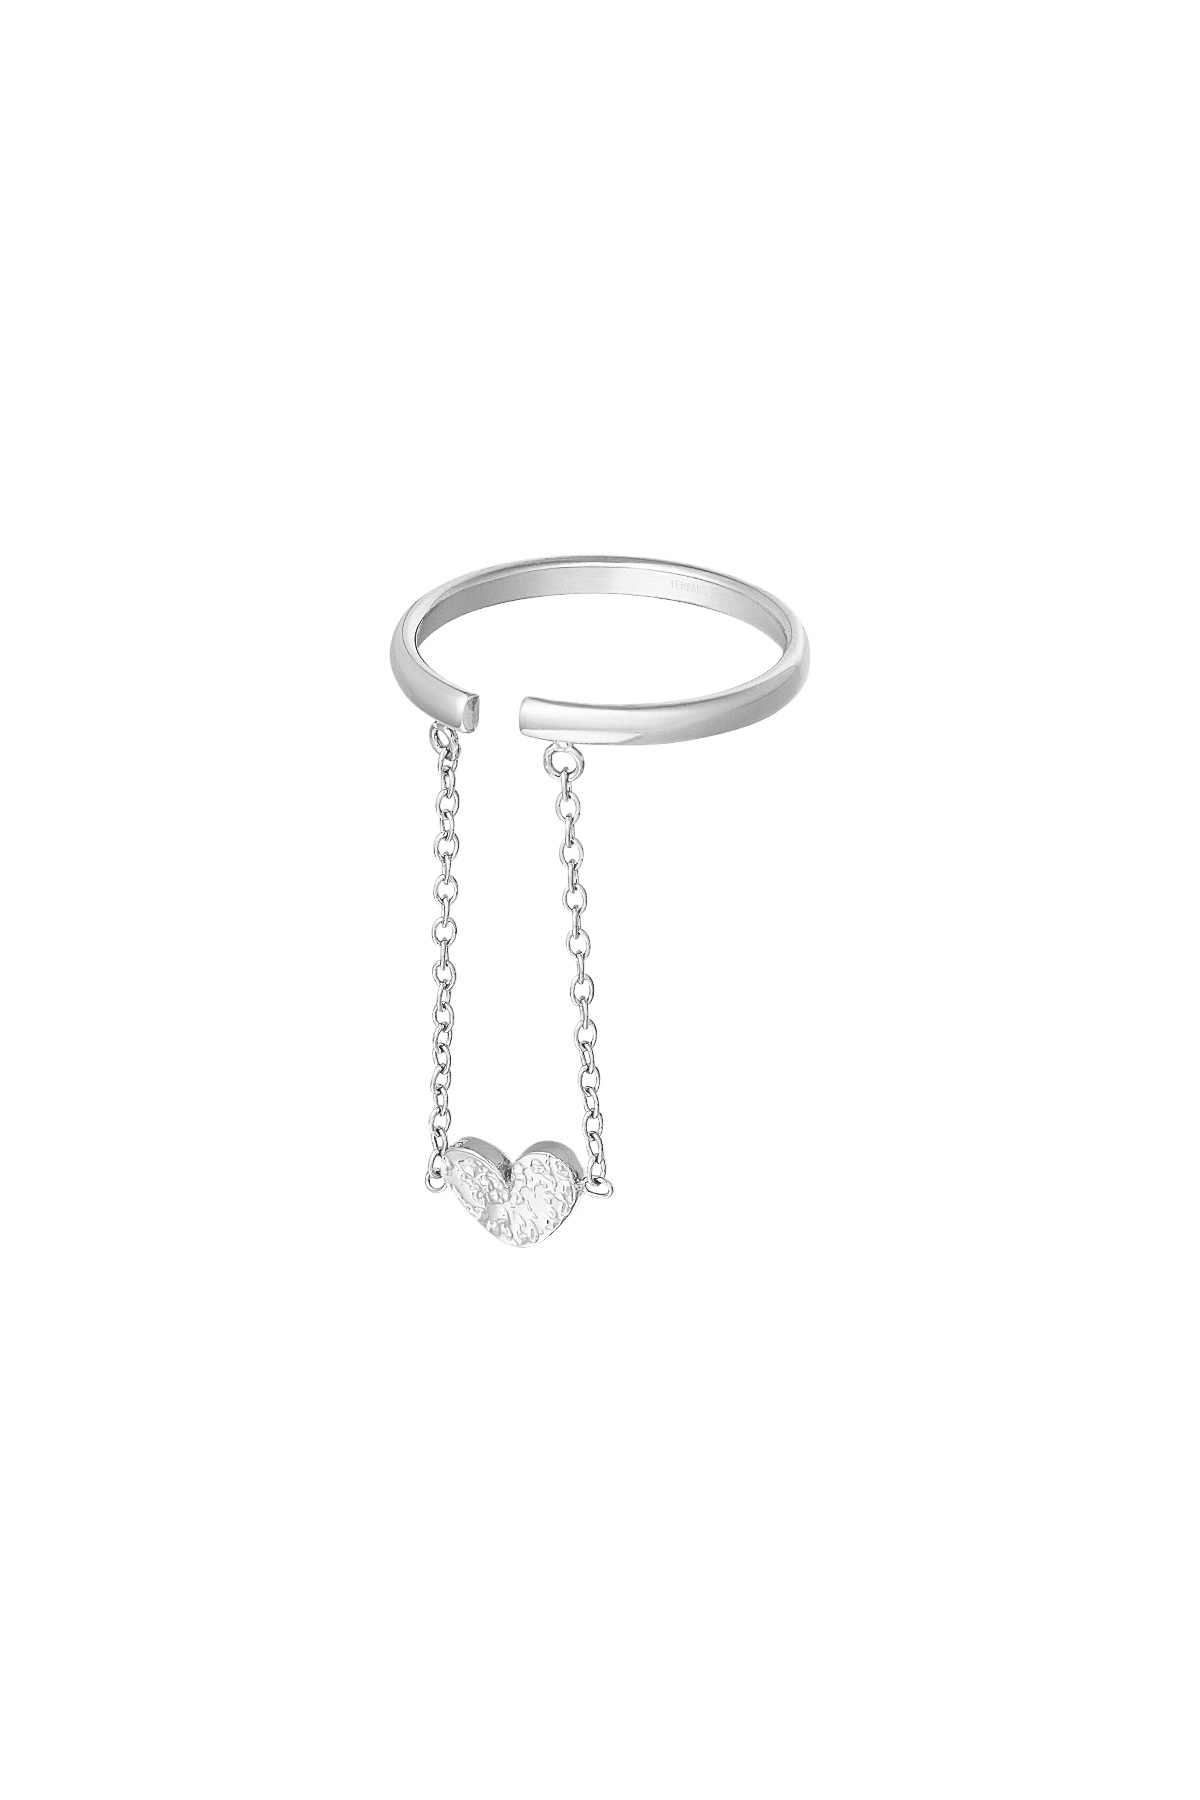 Ring heart with chain - silver